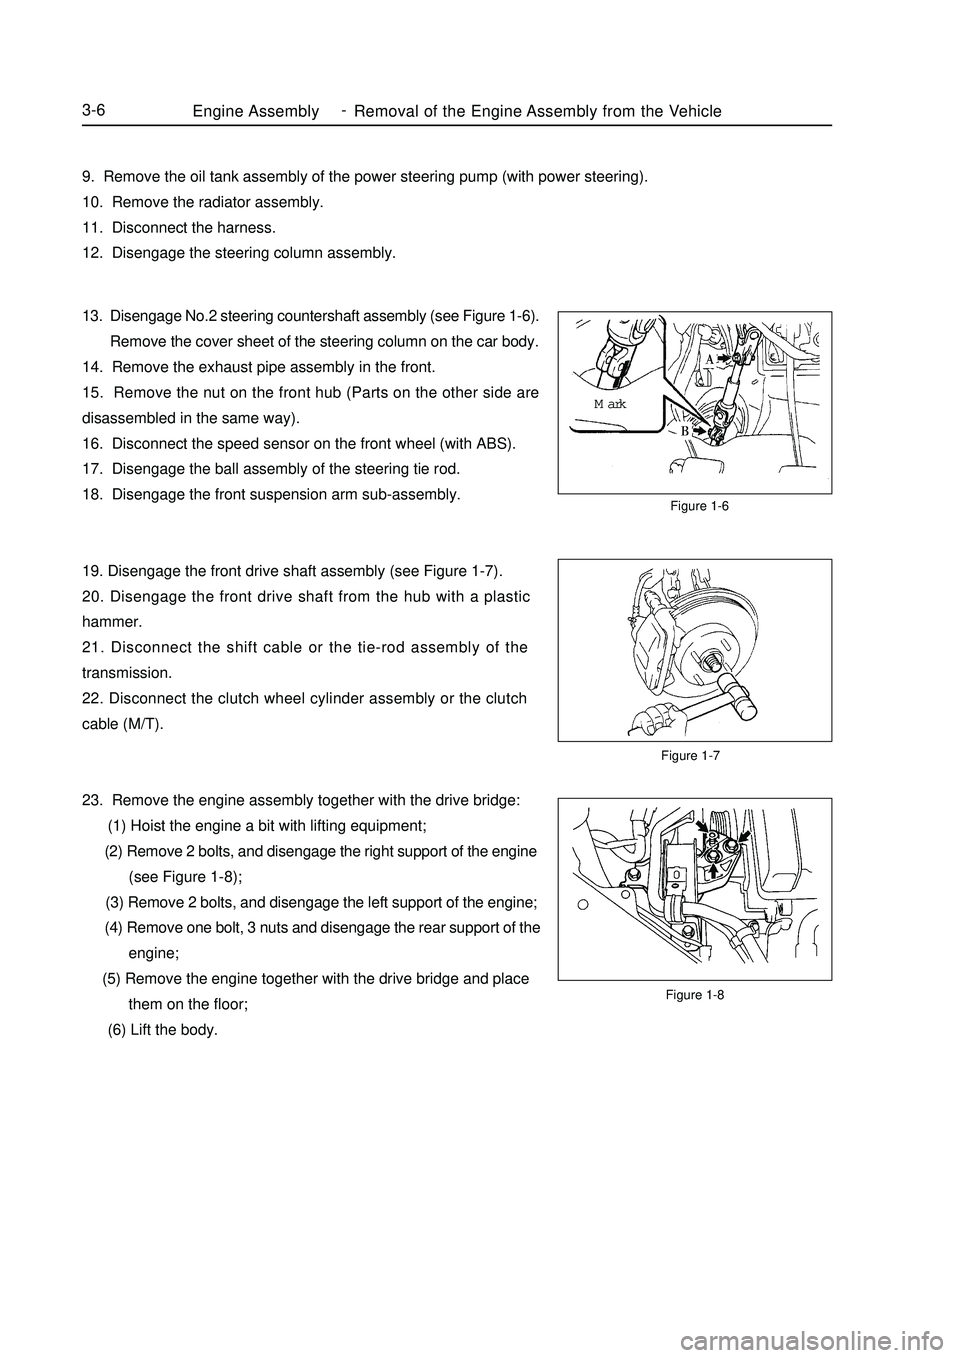 GEELY MK 2008  Workshop Manual Figure 1-7Figure 1-6
Figure 1-8Engine AssemblyRemoval of the Engine Assembly from the Vehicle3-69.  Remove the oil tank assembly of the power steering pump (with power steering).
10.  Remove the radia